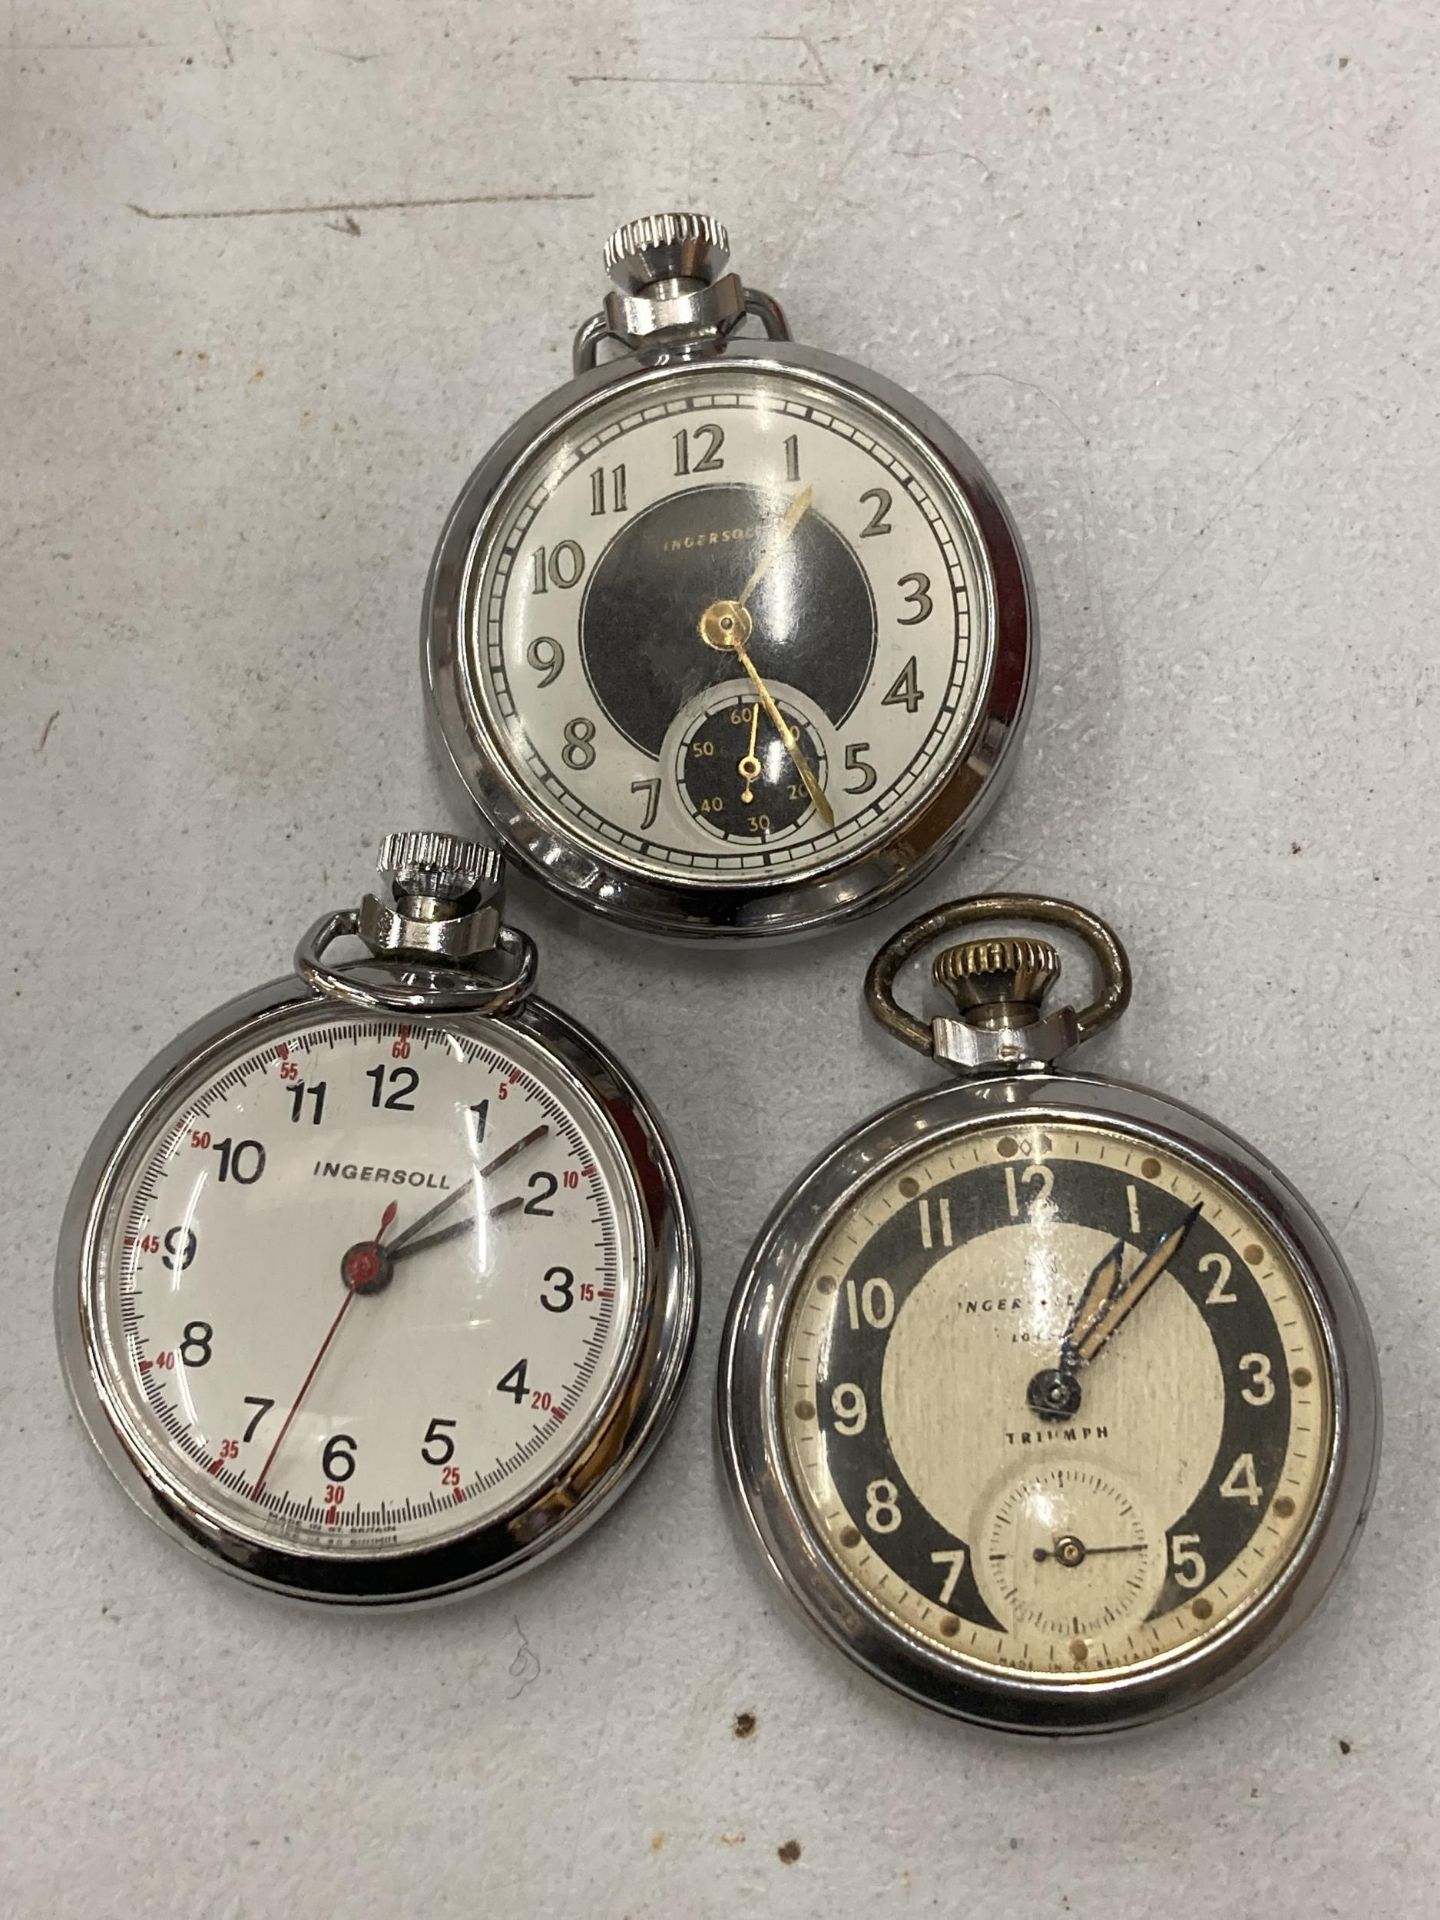 THREE VINTAGE INGERSOLL CHROME POCKET WATCHES, ALL BELIEVED WORKING